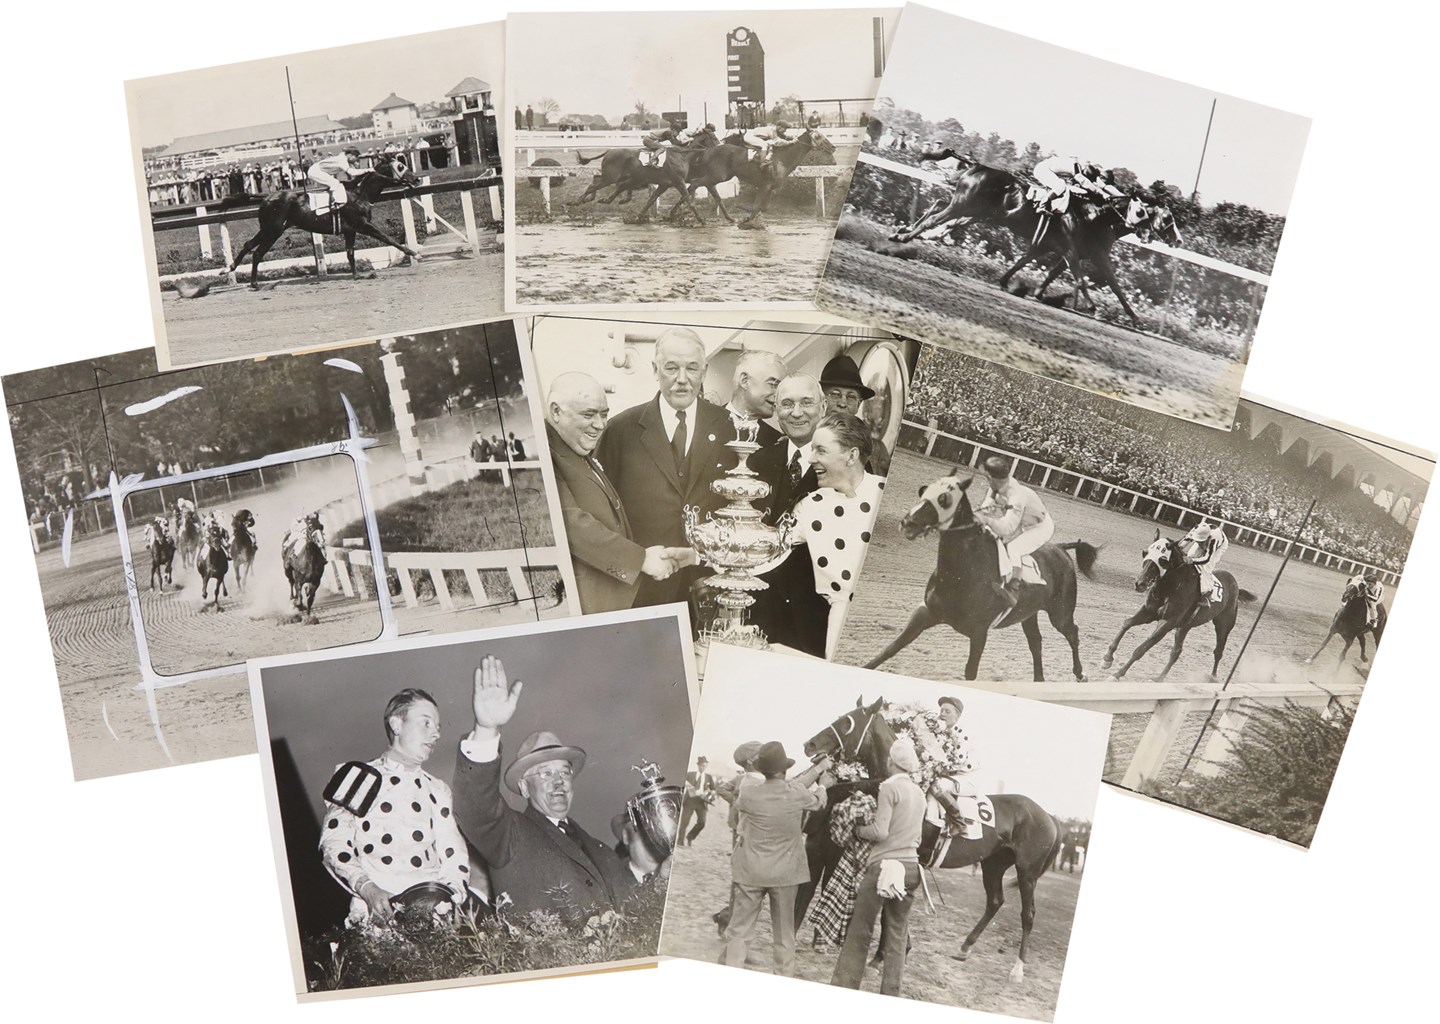 Triple Crown Winner, Omaha, & Equipoise, Important Racehorses of The 1930s (35)